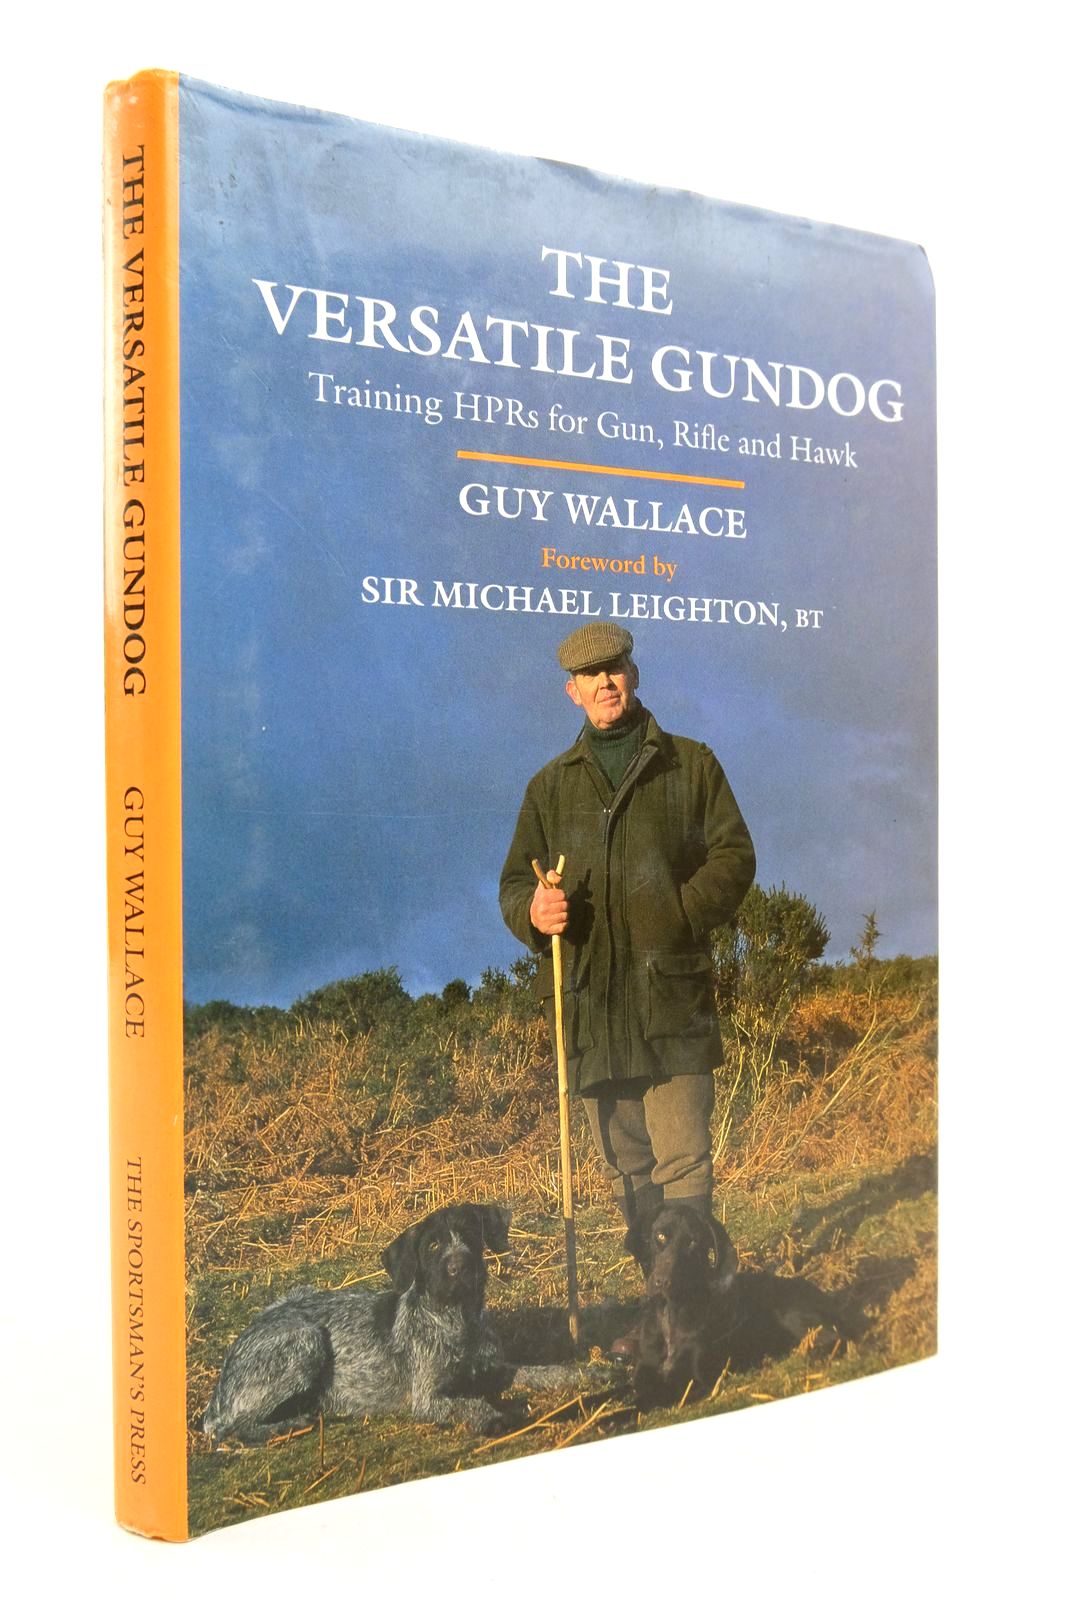 Photo of THE VERSATILE GUNDOG written by Wallace, Guy published by The Sportsman's Press (STOCK CODE: 2139617)  for sale by Stella & Rose's Books